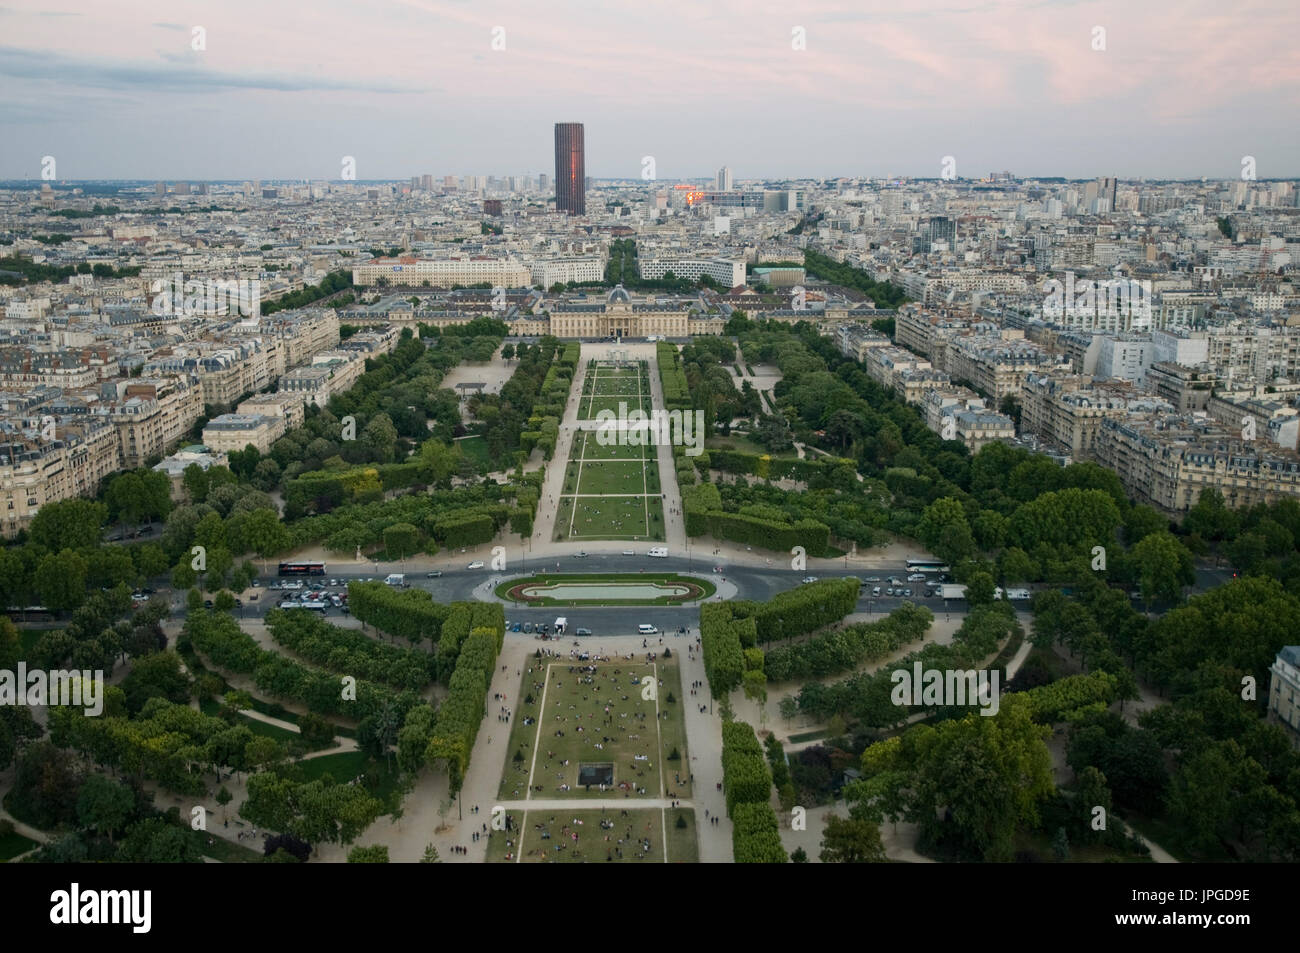 South-east view over Paris from the Eiffel Tower with Champ de Mars in the foreground and Montparnasse Tower in the background. Stock Photo